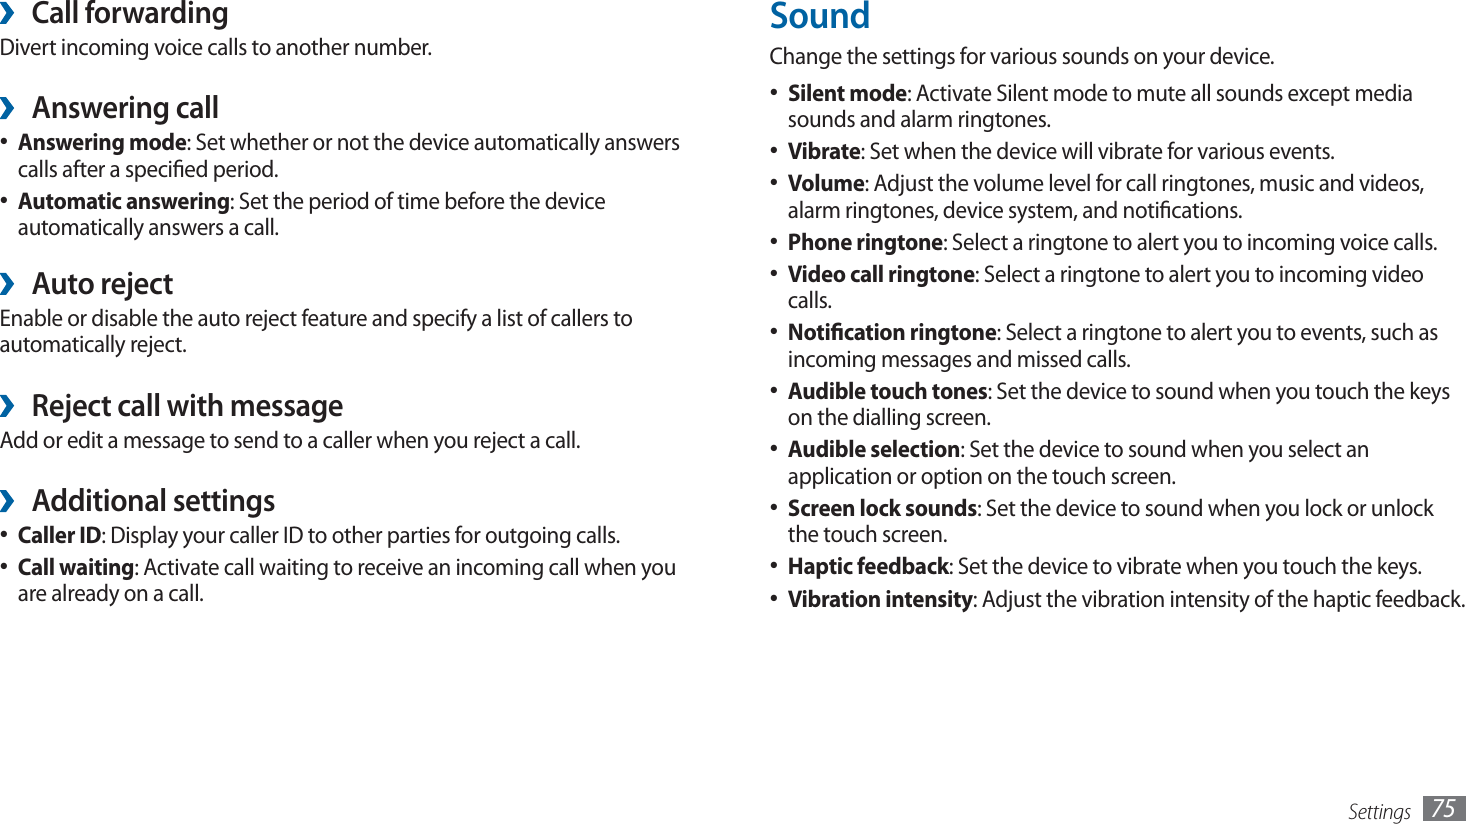 Settings 75SoundChange the settings for various sounds on your device. Silent mode•  : Activate Silent mode to mute all sounds except media sounds and alarm ringtones.Vibrate•  : Set when the device will vibrate for various events.Volume•  : Adjust the volume level for call ringtones, music and videos, alarm ringtones, device system, and notications.Phone ringtone•  : Select a ringtone to alert you to incoming voice calls.Video call ringtone•  : Select a ringtone to alert you to incoming video calls.Notication ringtone•  : Select a ringtone to alert you to events, such as incoming messages and missed calls.Audible touch tones•  : Set the device to sound when you touch the keys on the dialling screen.Audible selection•  : Set the device to sound when you select an application or option on the touch screen.Screen lock sounds•  : Set the device to sound when you lock or unlock the touch screen.Haptic feedback•  : Set the device to vibrate when you touch the keys.Vibration intensity•  : Adjust the vibration intensity of the haptic feedback.Call forwarding ›Divert incoming voice calls to another number.Answering call ›Answering mode•  : Set whether or not the device automatically answers calls after a specied period.Automatic answering•  : Set the period of time before the device automatically answers a call. Auto reject ›Enable or disable the auto reject feature and specify a list of callers to automatically reject.Reject call with message ›Add or edit a message to send to a caller when you reject a call.Additional settings ›Caller ID•  : Display your caller ID to other parties for outgoing calls.Call waiting•  : Activate call waiting to receive an incoming call when you are already on a call.